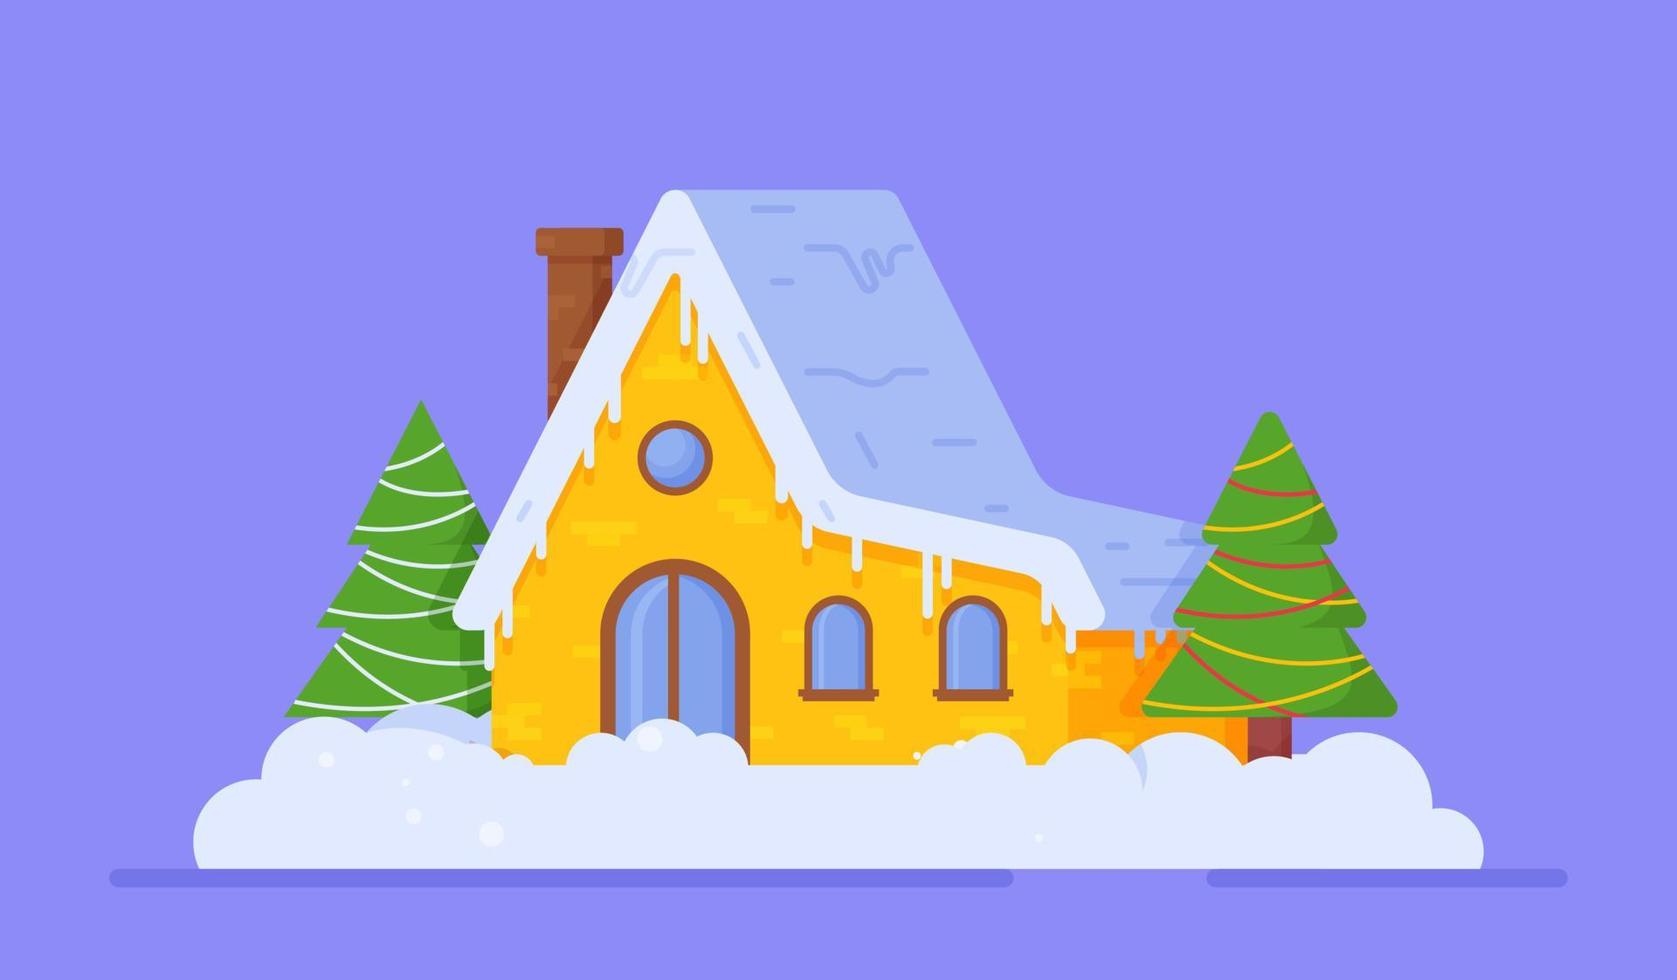 A beautiful house covered with snow and furnished with Christmas trees. Vector illustration of a winter yellow house.